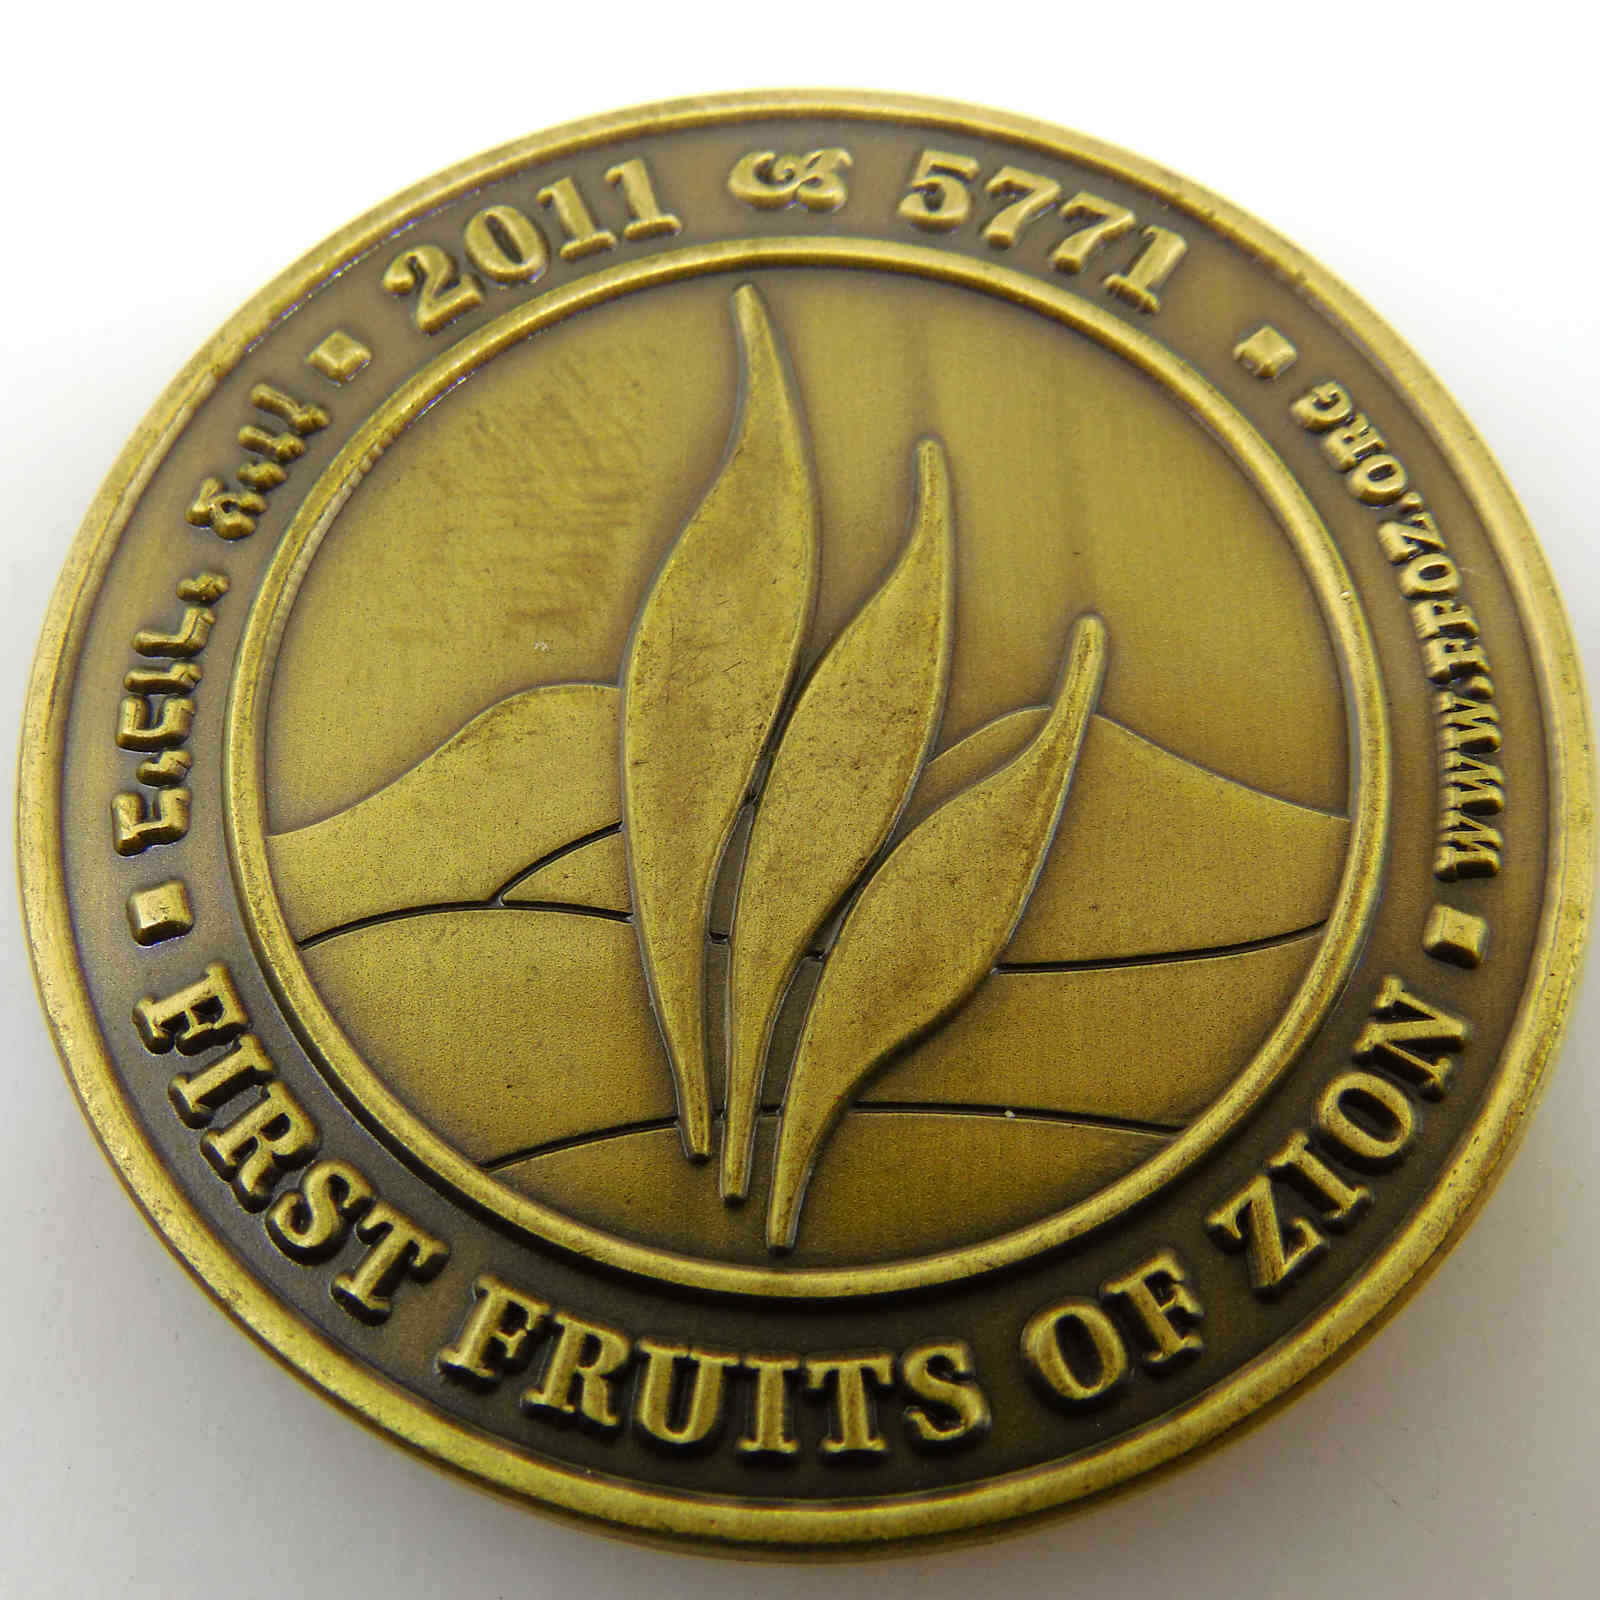 FIRST FRUITS OF ZION CHALLENGE COIN